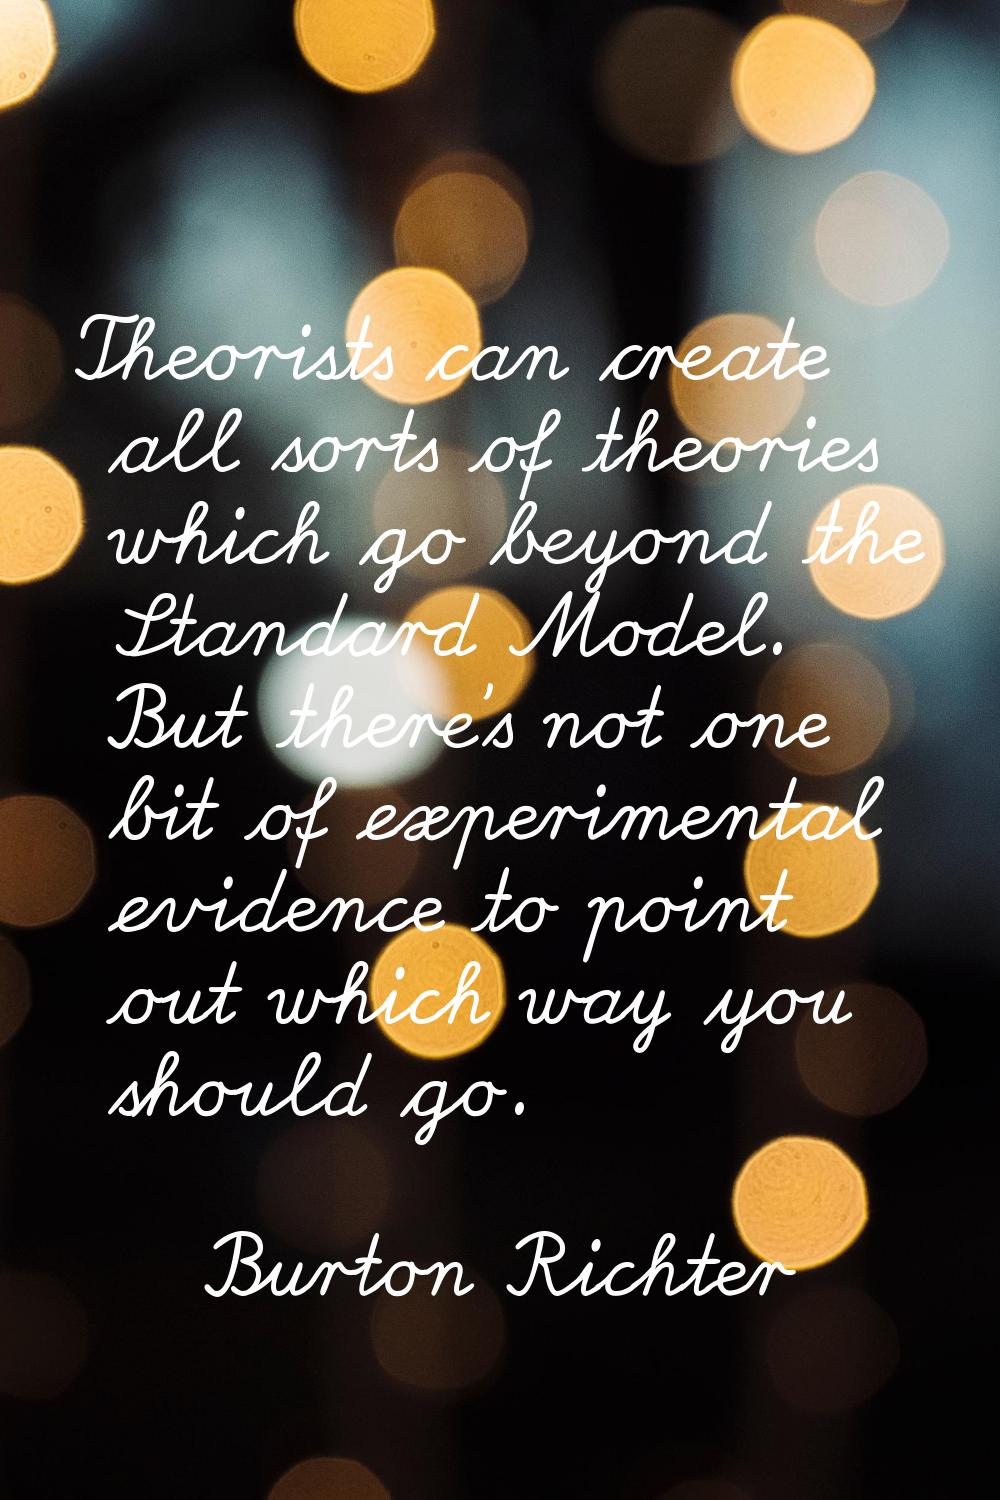 Theorists can create all sorts of theories which go beyond the Standard Model. But there's not one 